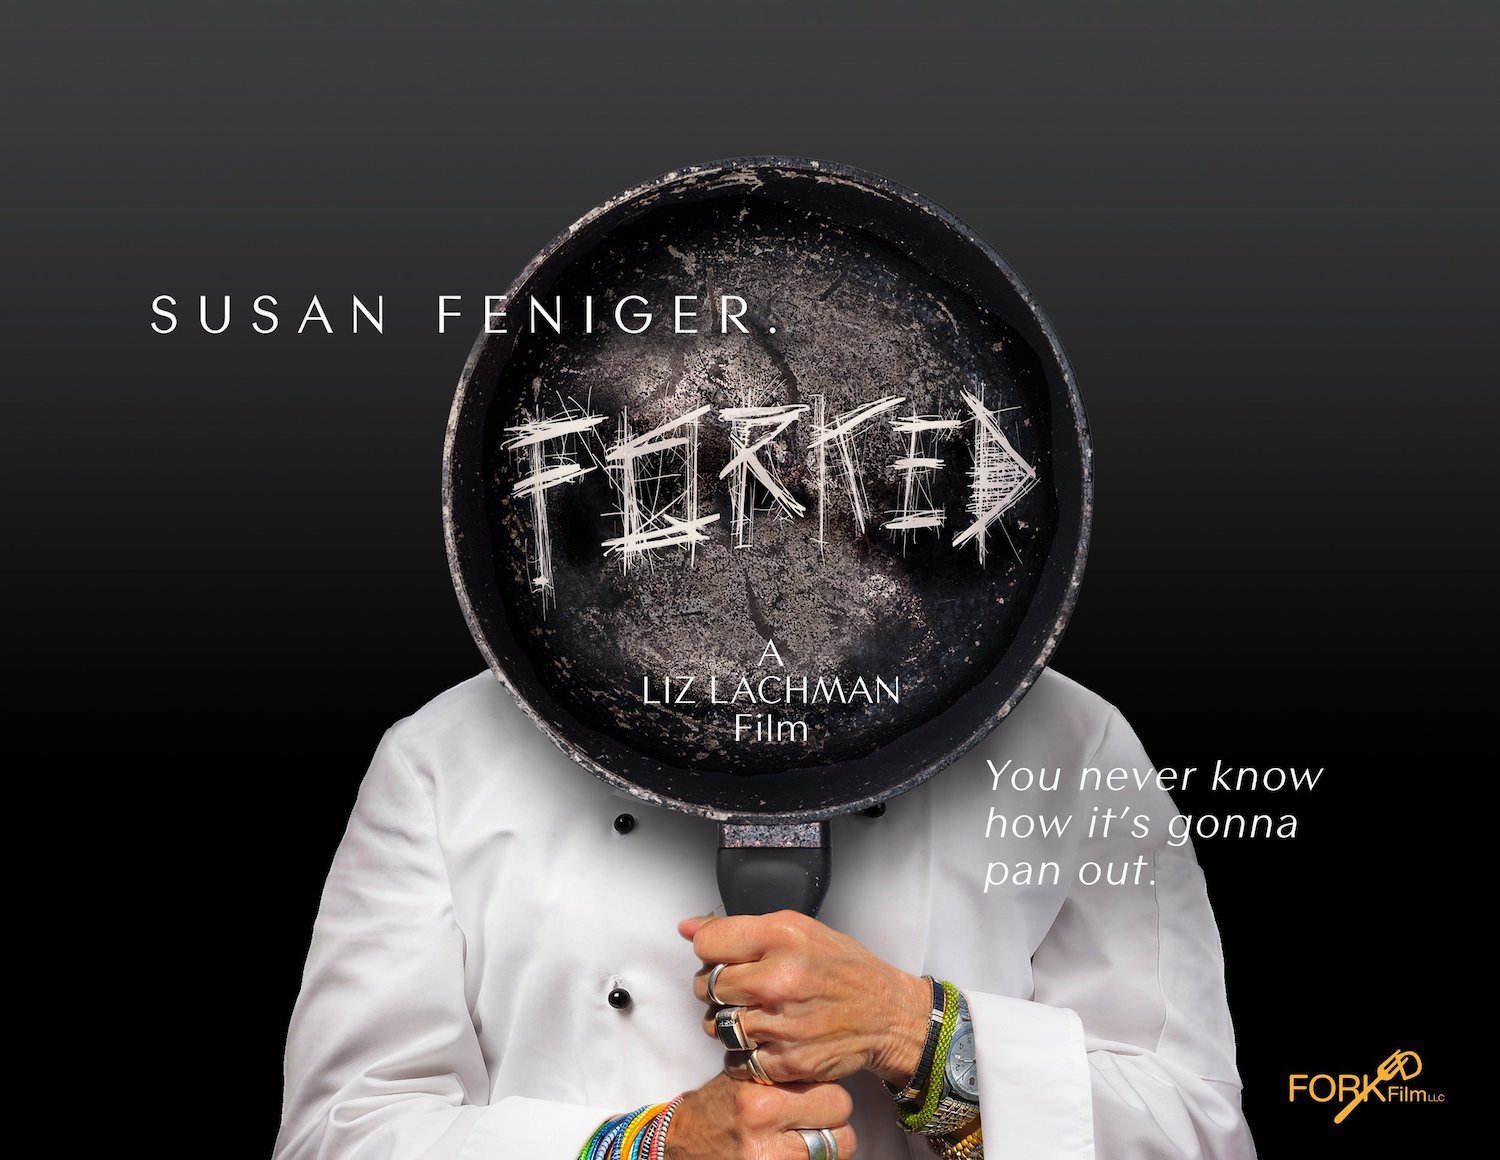 Poster for Susan Feniger film "Forked" with a cover depicting the chef holding a pan over her face